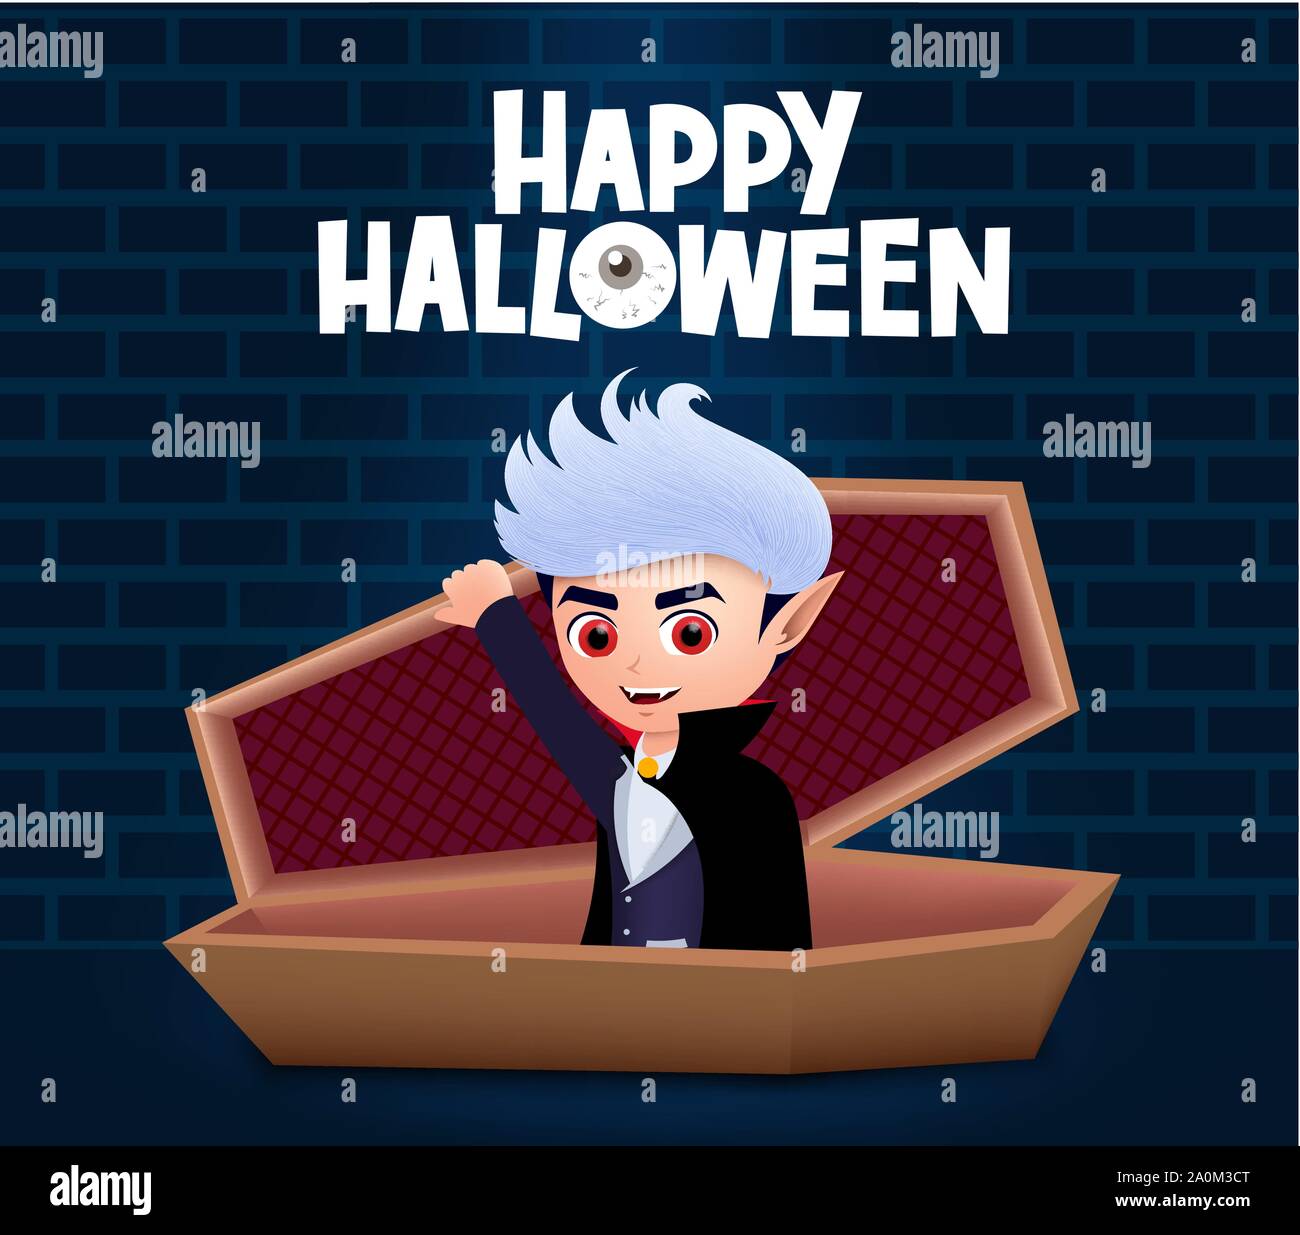 Happy halloween vampire vector design. Male vampire dracula with red eyes wearing cape while sitting inside the coffin with happy halloween greeting. Stock Vector